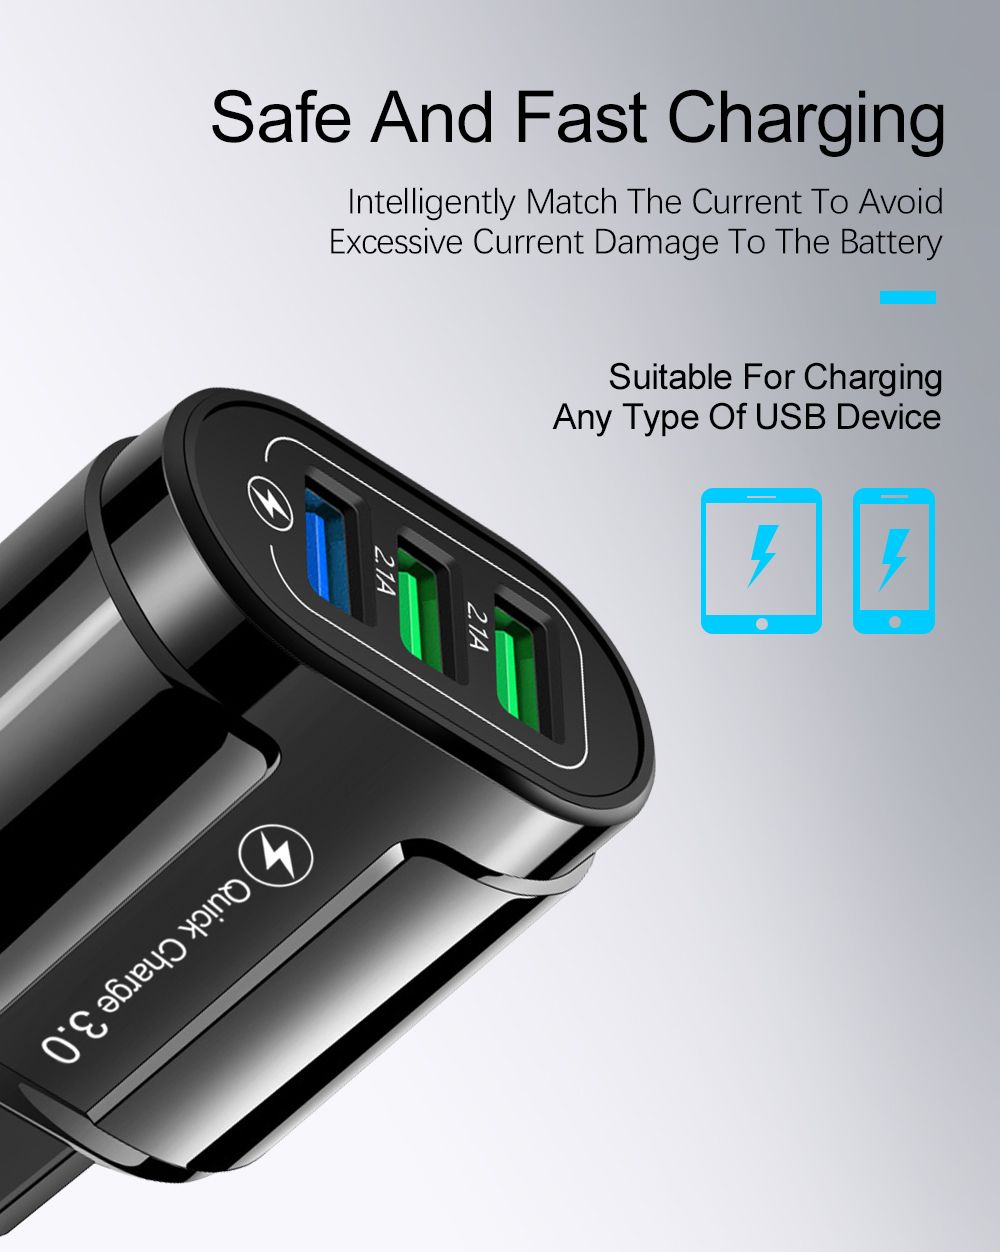 Bakeey-3-Port-USB-Charger-QC30-Universal-Fast-Charging-USB-Charger-For-iPhone-XS-11-Pro-Mi10-Note-9S-1686567